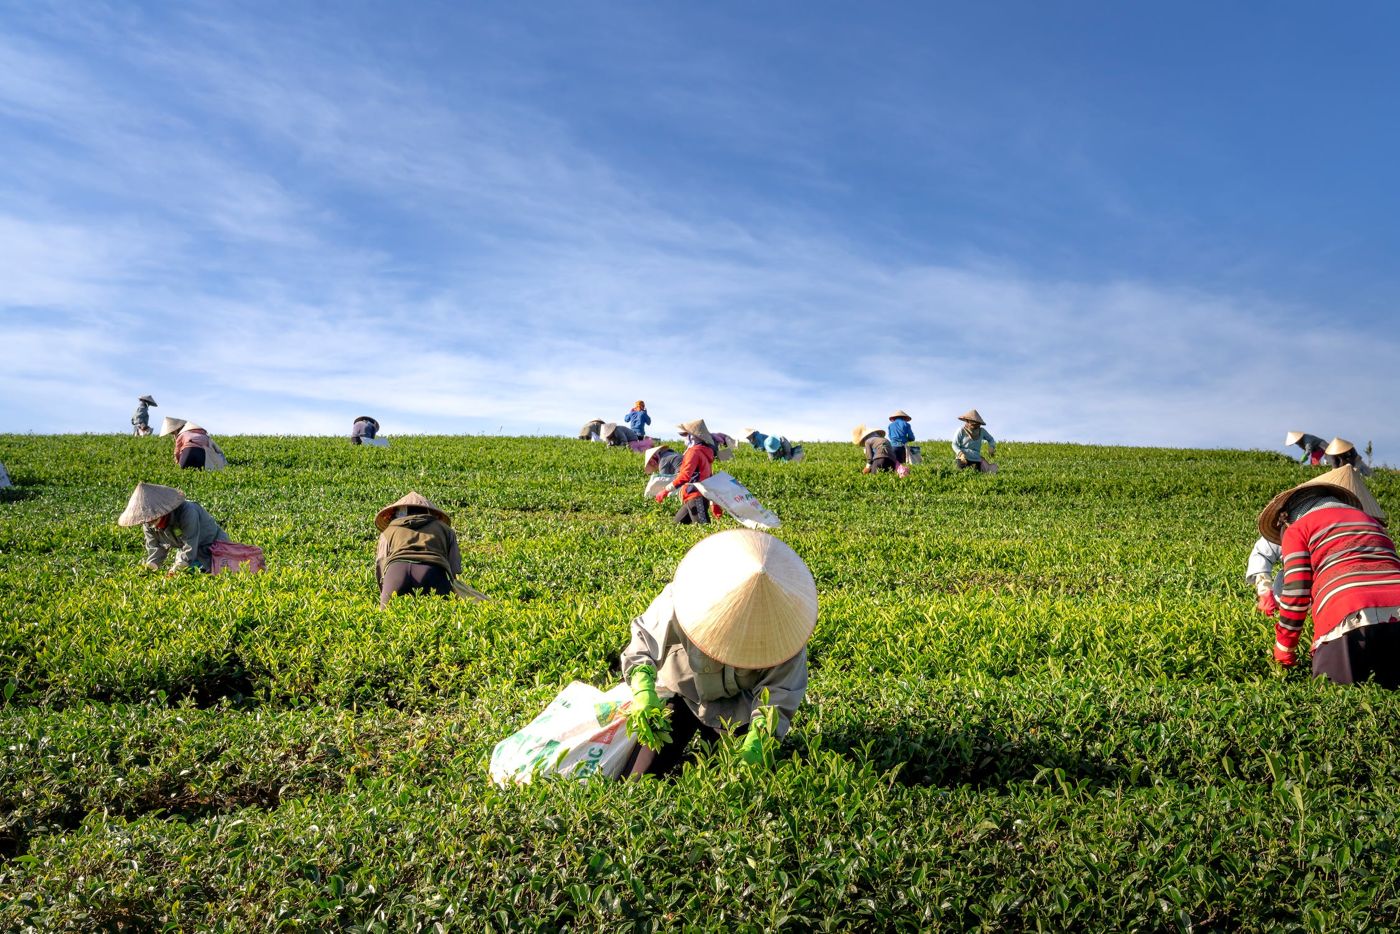 The hills of tea stretch out over the horizon